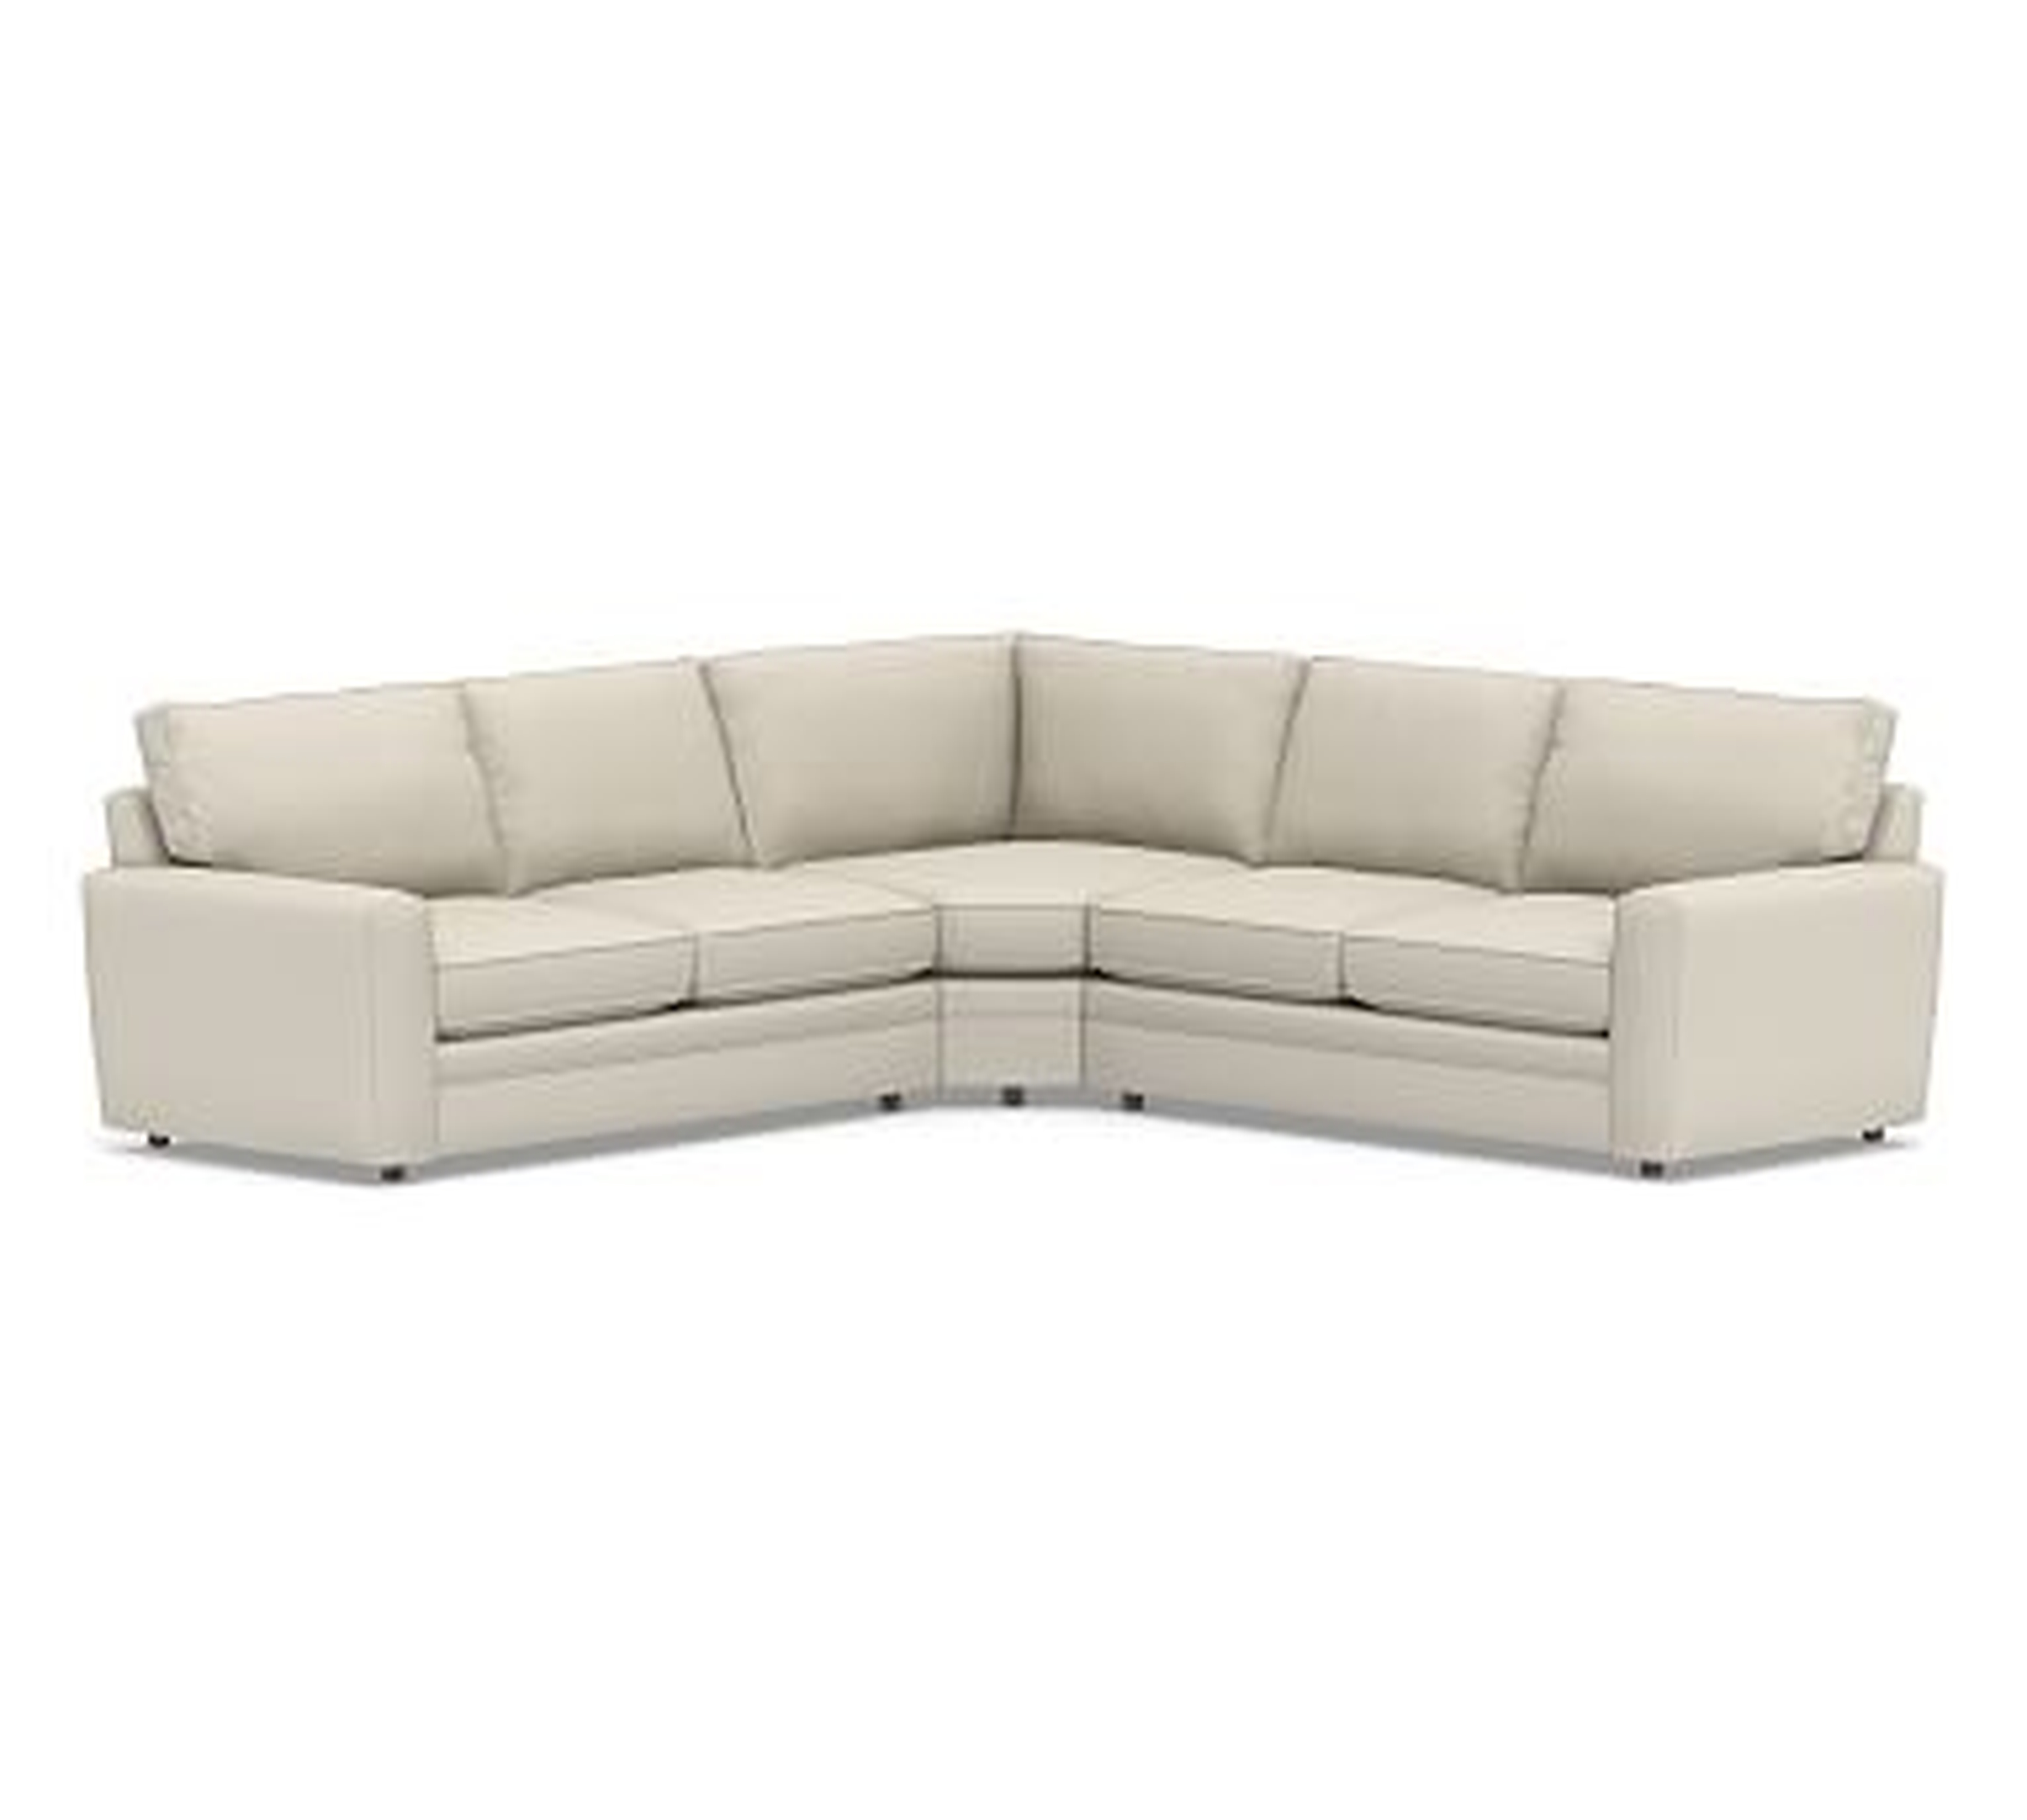 Pearce Square Arm Upholstered 3-Piece L-Shaped Wedge Sectional, Down Blend Wrapped Cushions, Sunbrella(R) Performance Slub Tweed Pebble - Pottery Barn